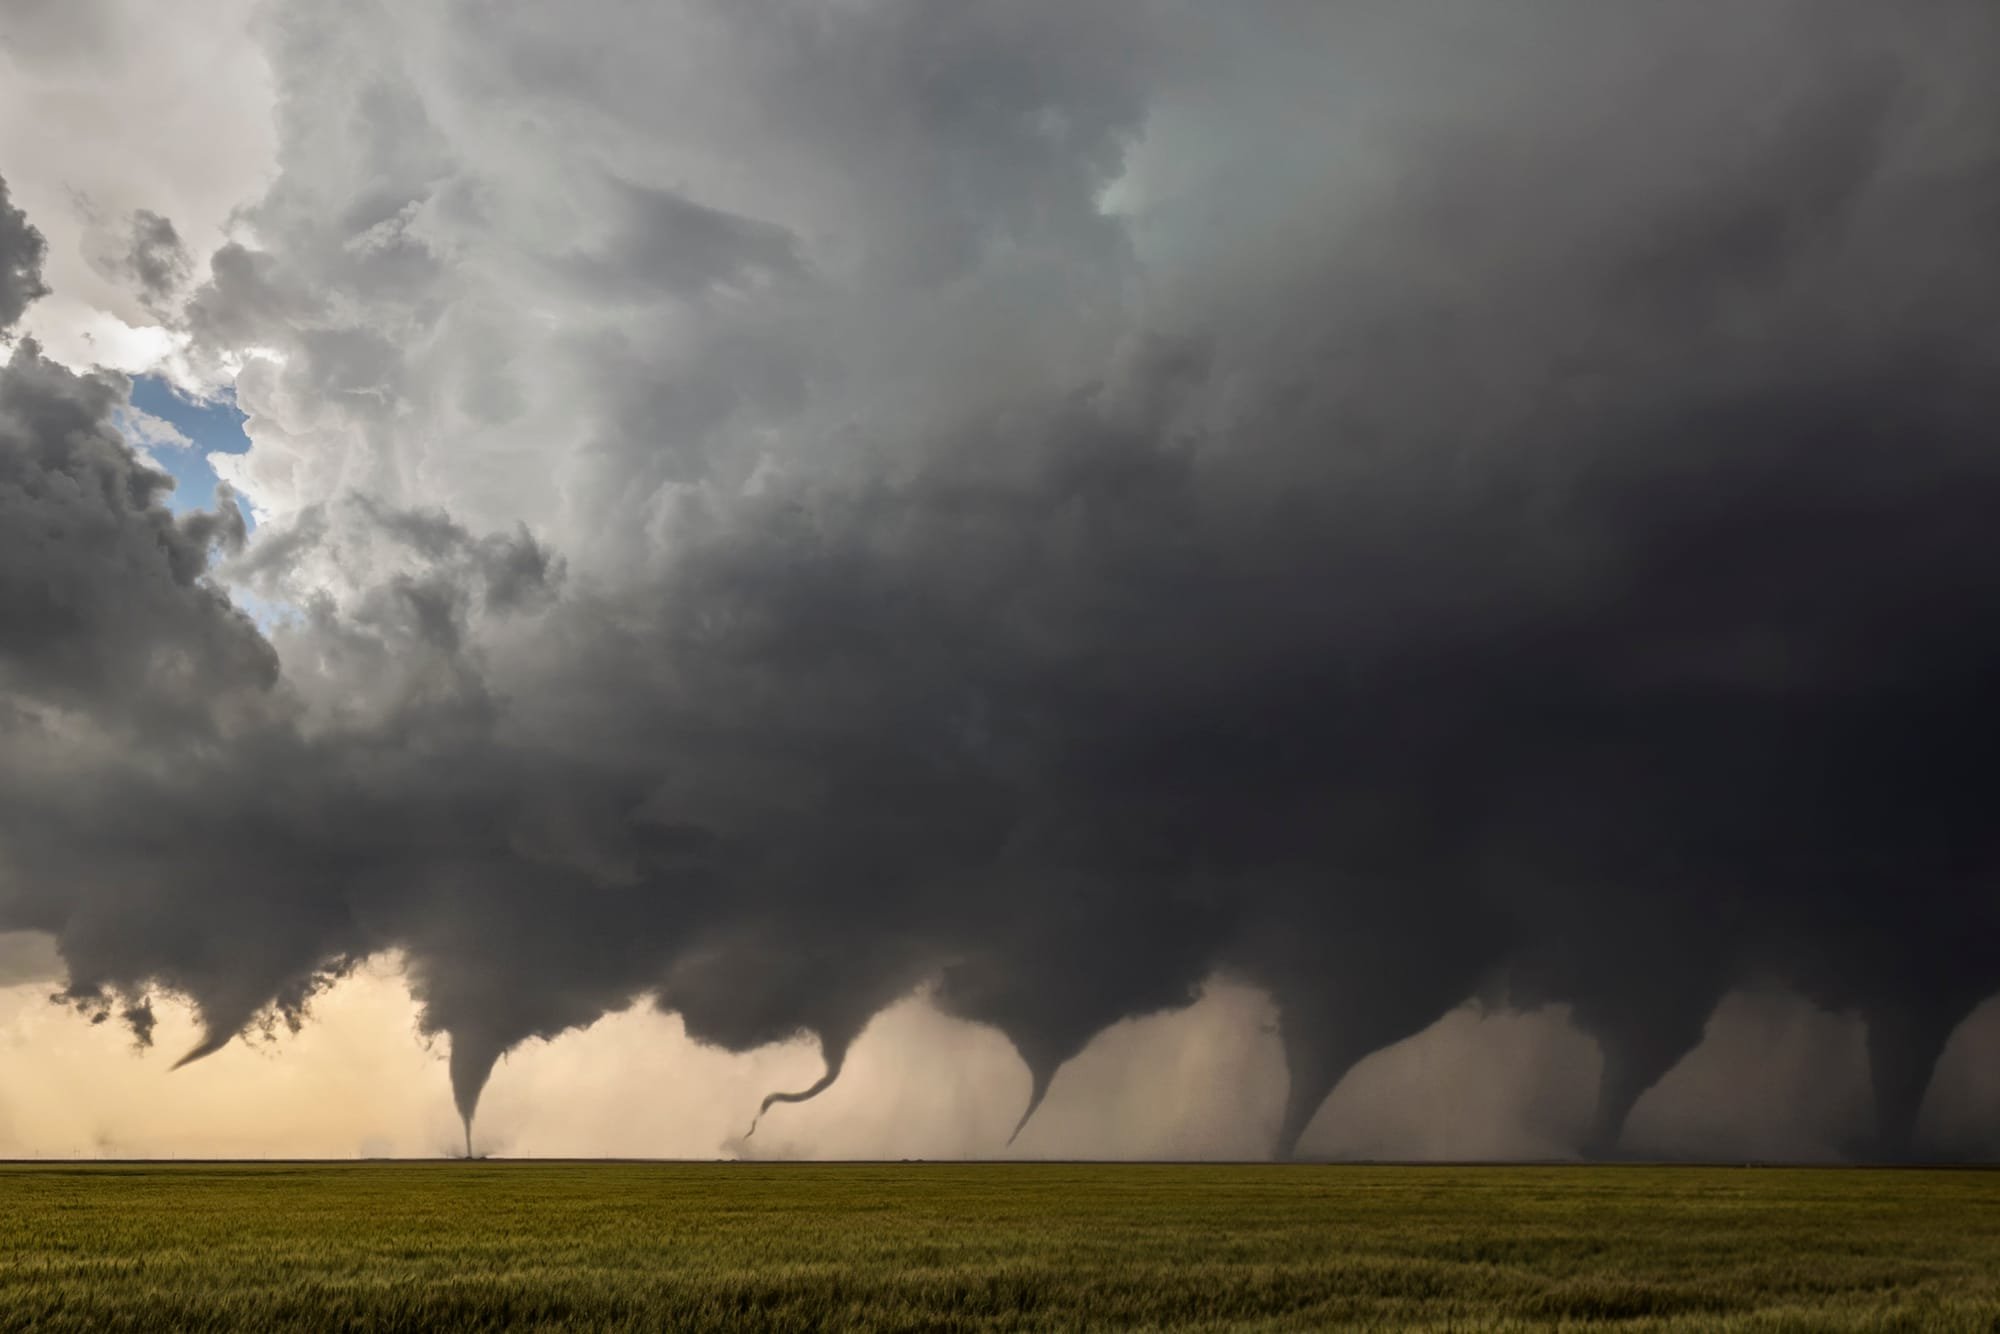 Some Unusual Facts on Tornadoes